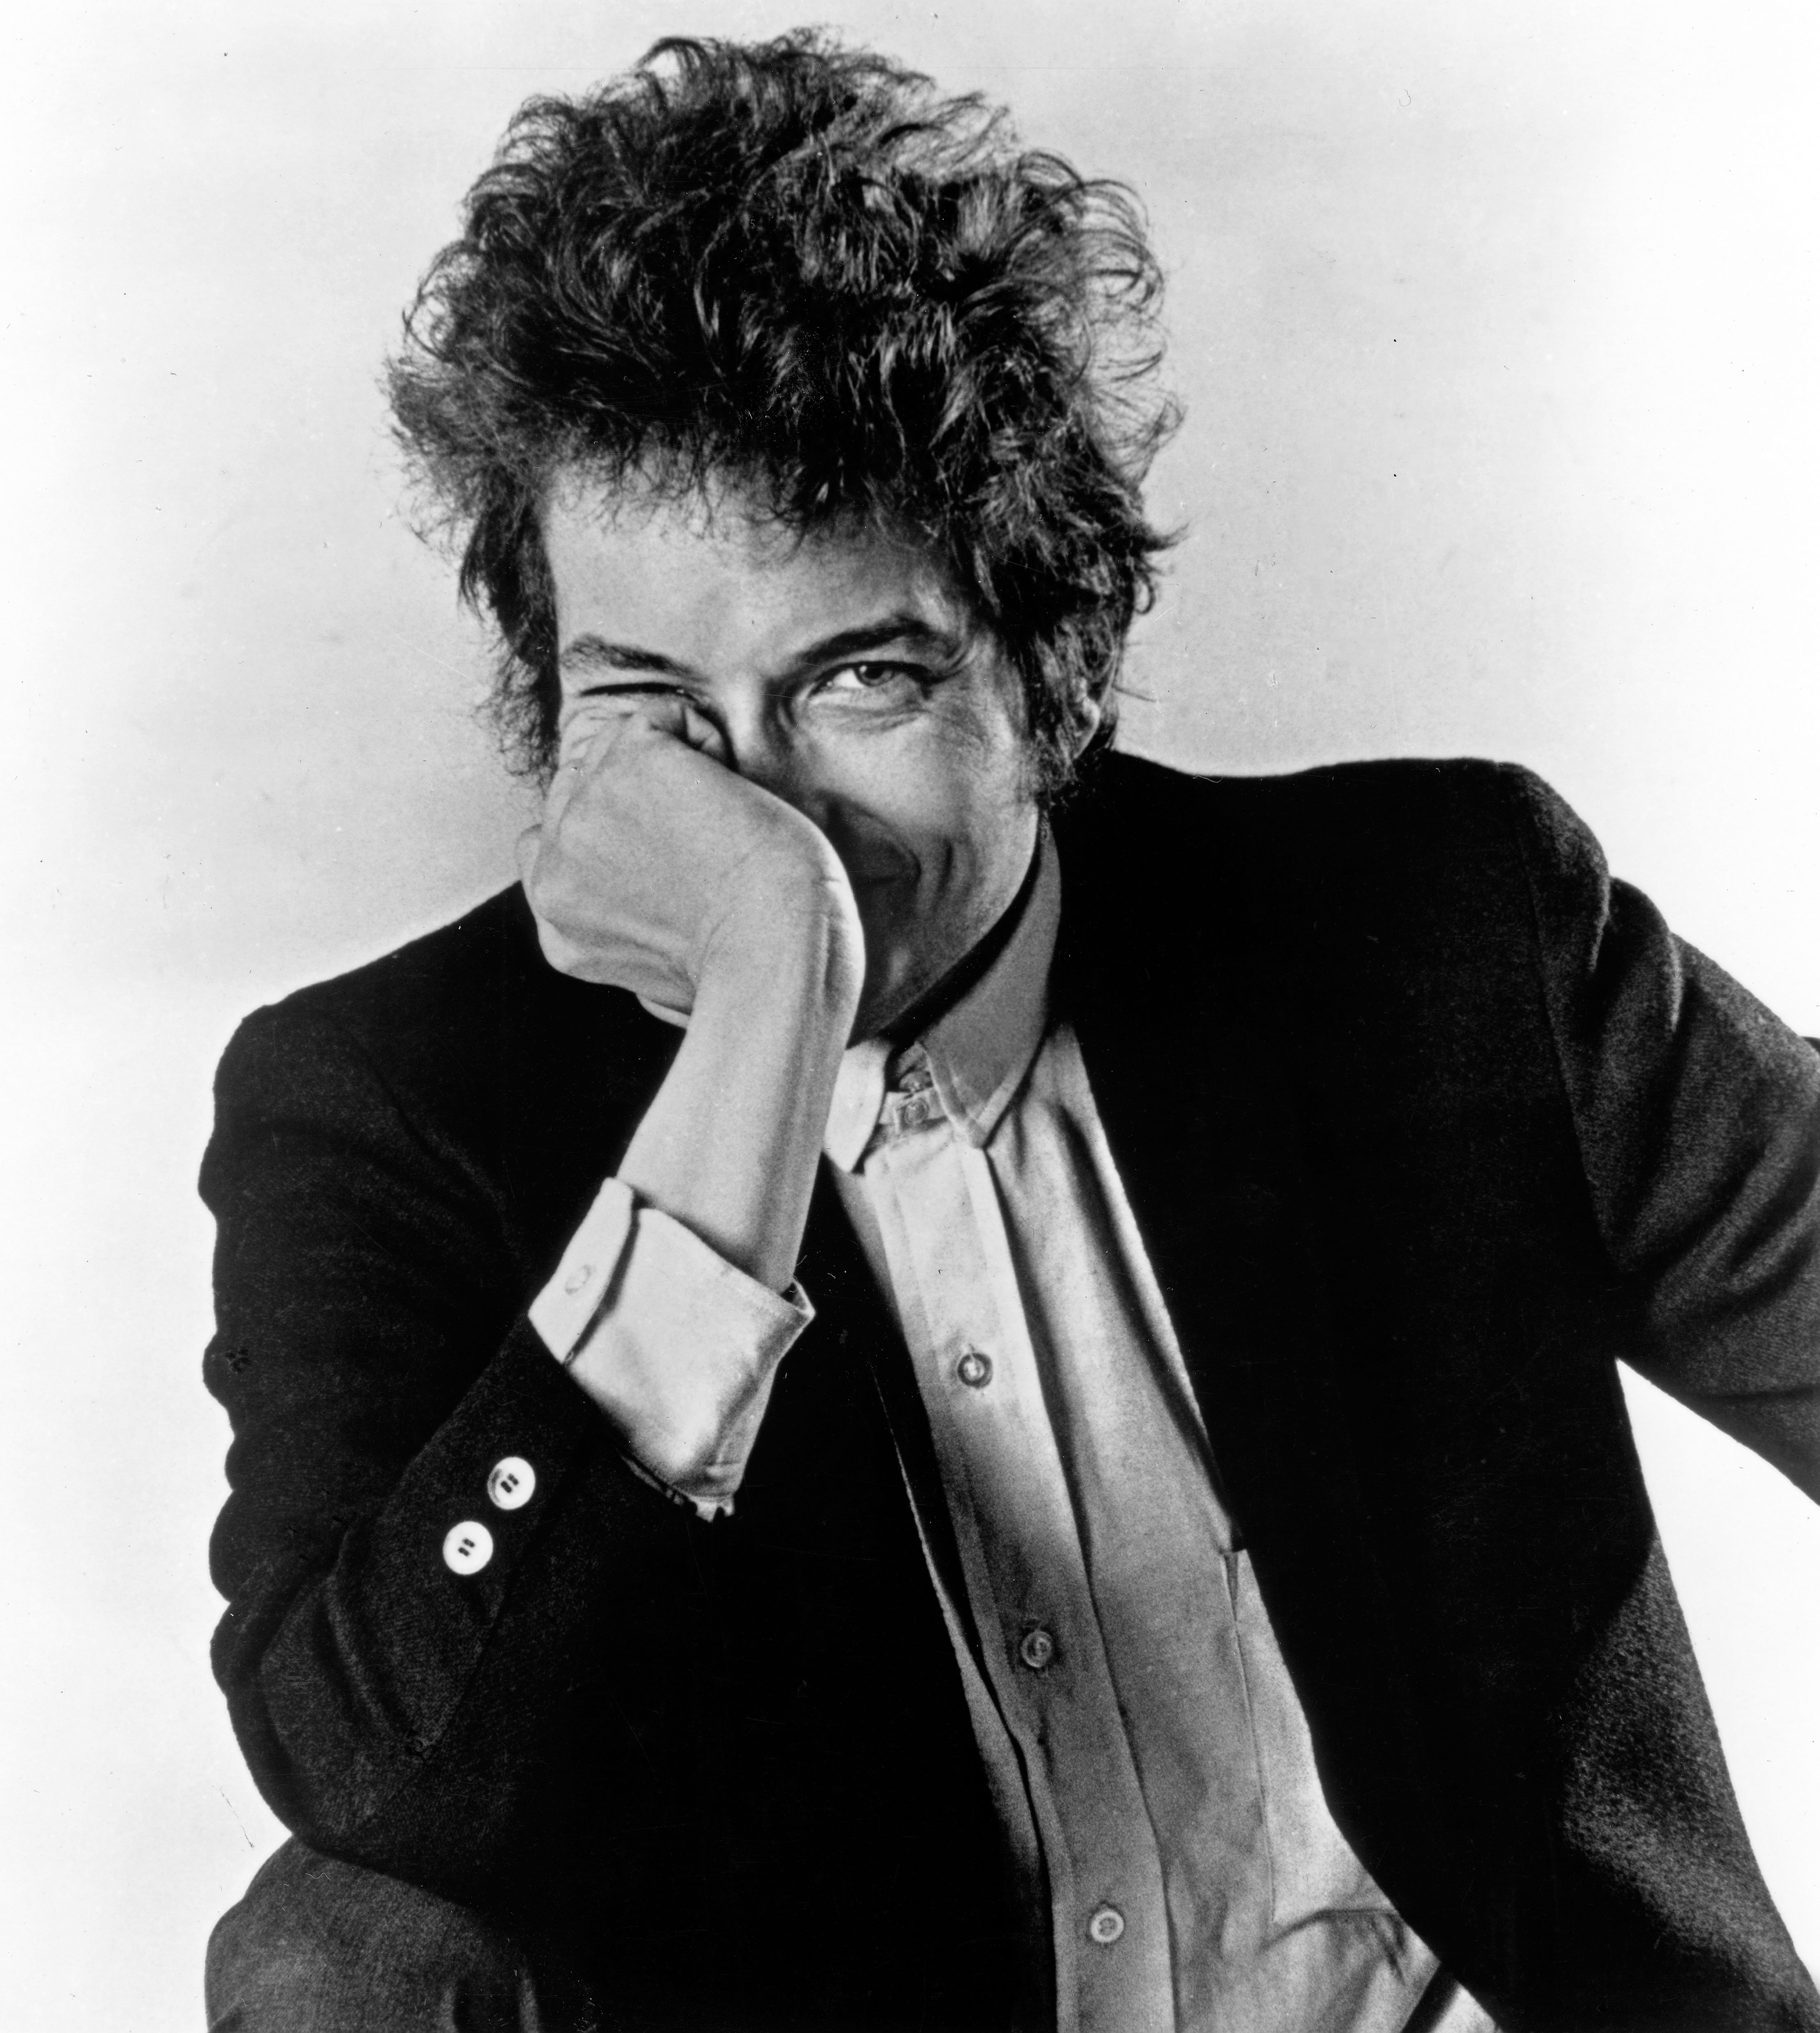 Portrait of Bob Dylan in the 1960s | Source: Getty Images